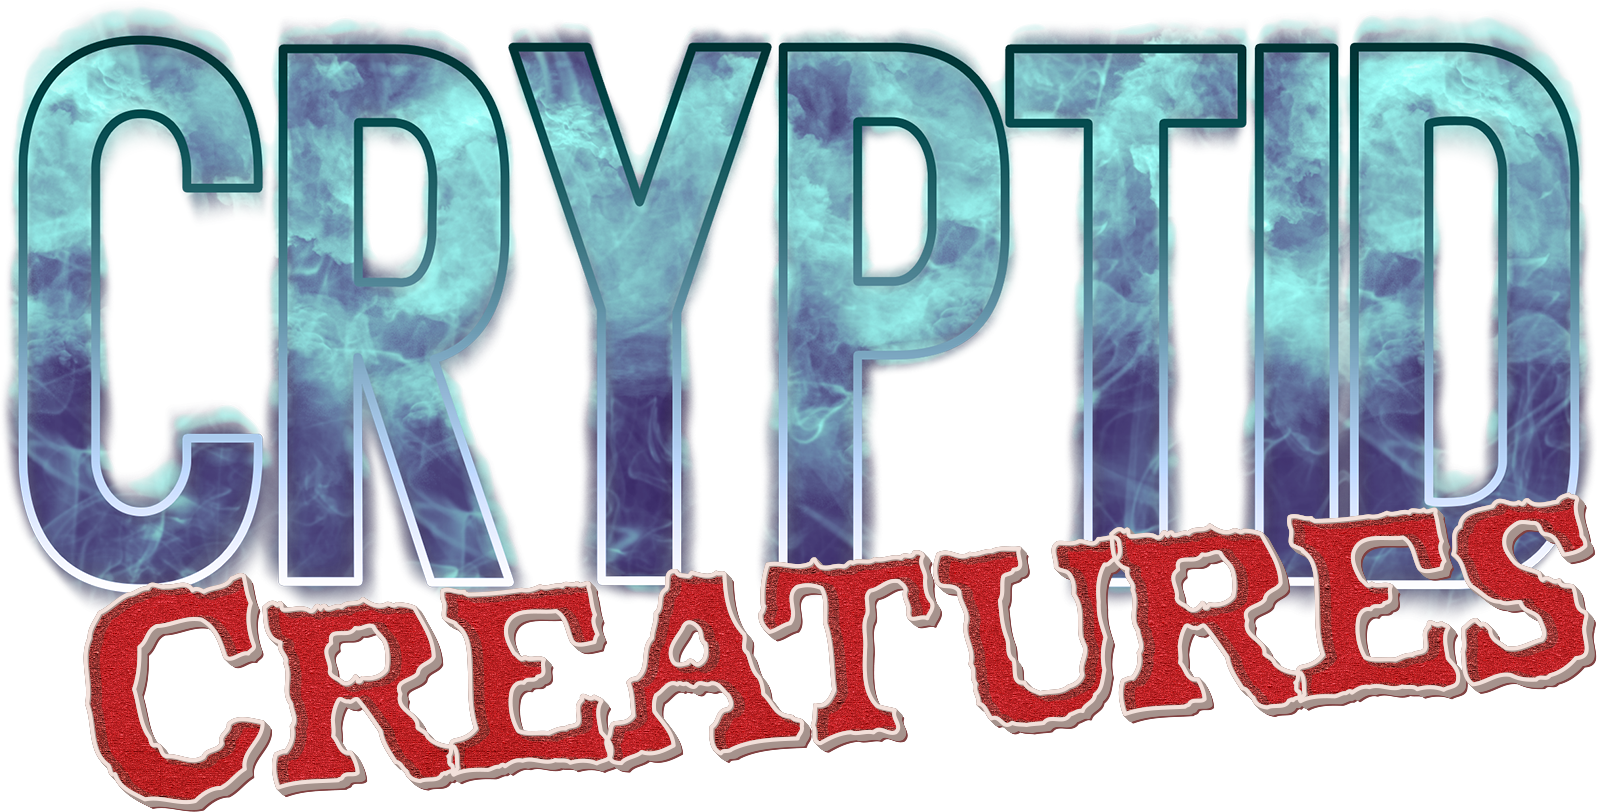 Audio Podcast - Monster In The Woods - By Cryptid Creatures